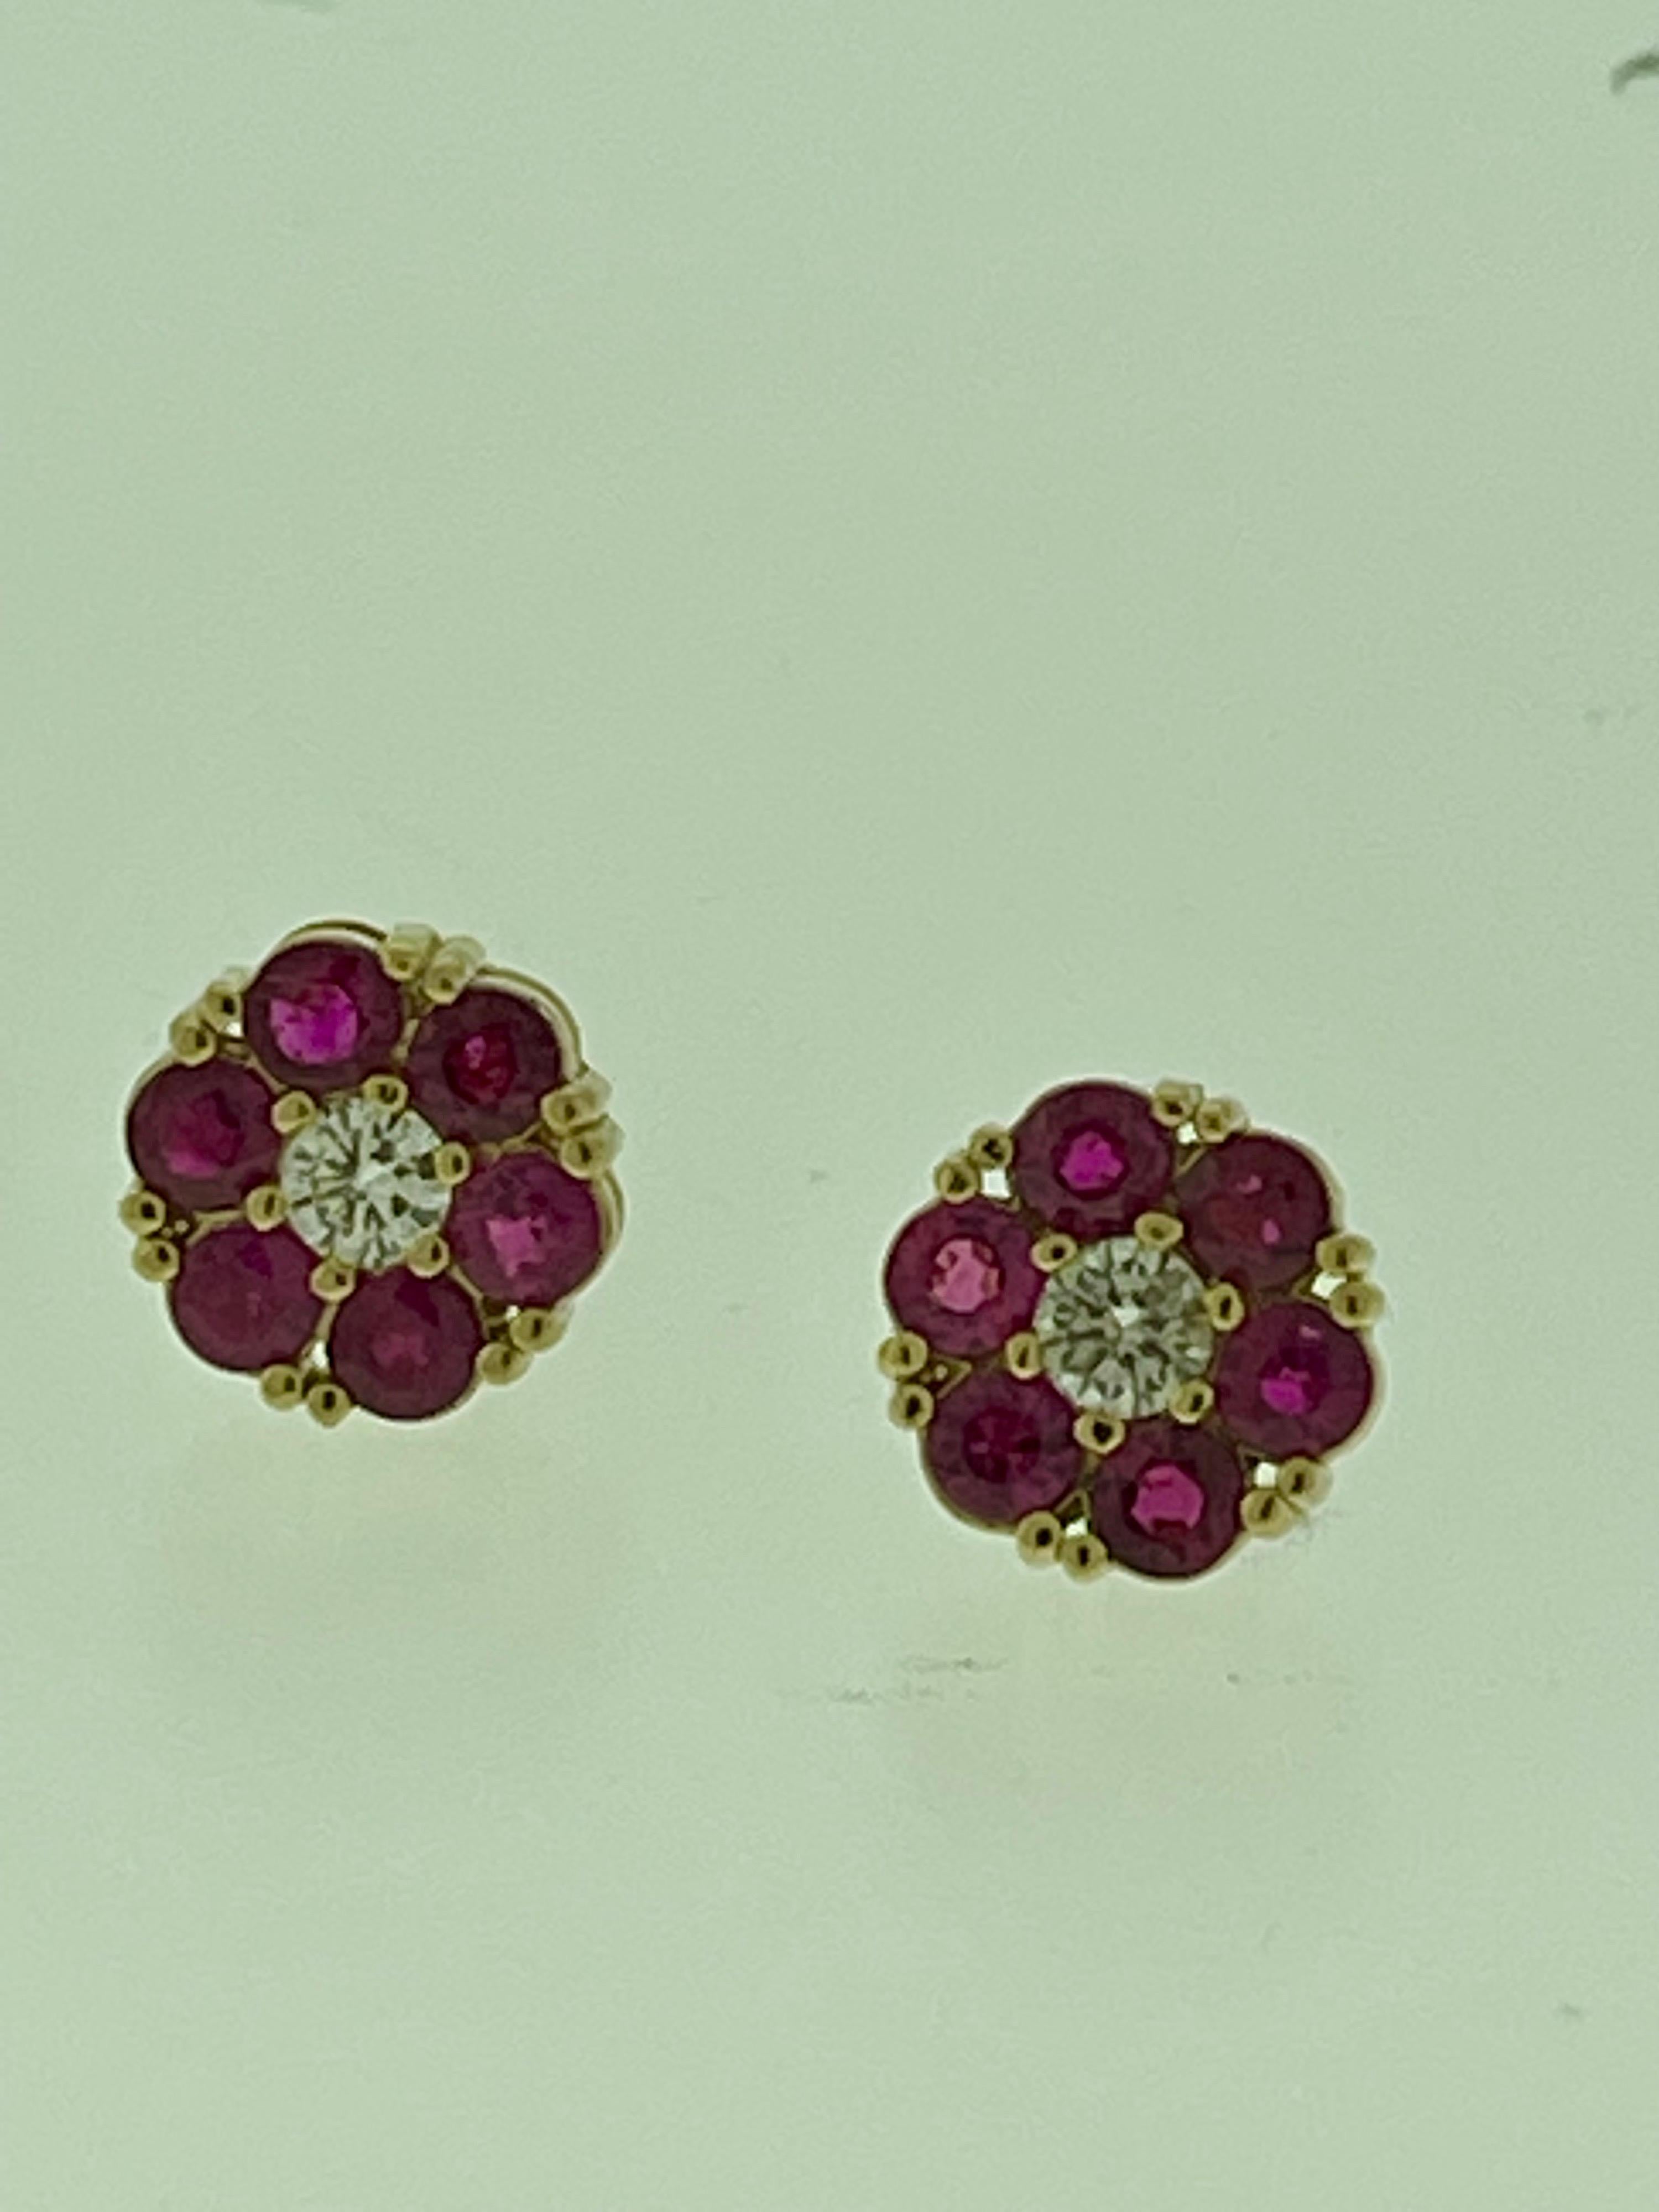 3 Carat Ruby & Diamond Floral Cluster Flower Stud Earrings 14 Karat Yellow Gold In Excellent Condition For Sale In New York, NY